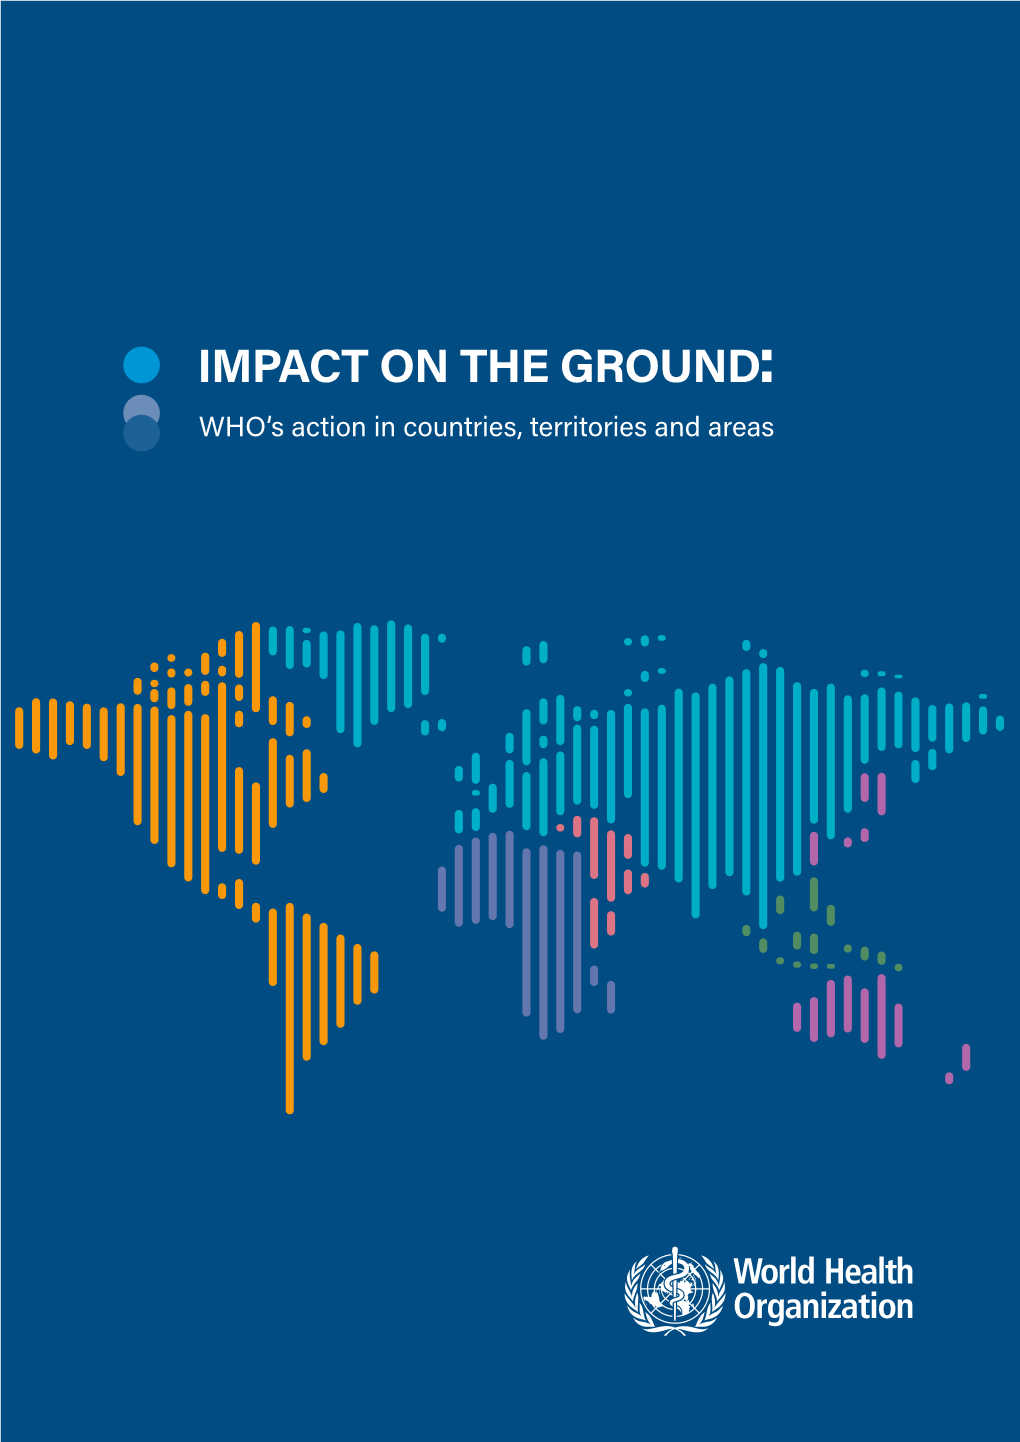 IMPACT on the GROUND: WHO’S Action in Countries, Territories and Areas